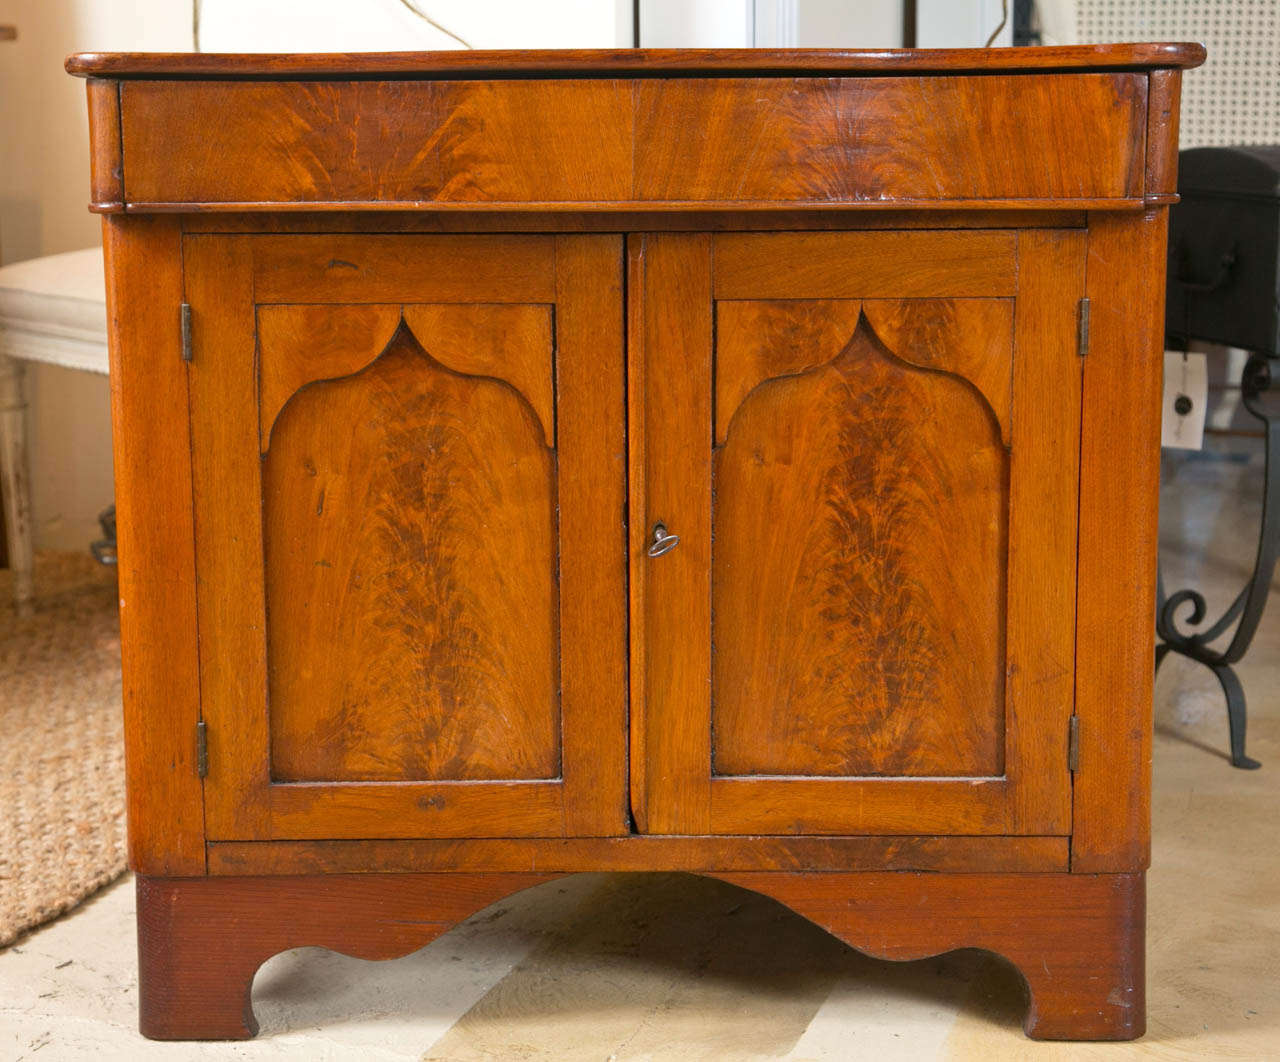 Lovely petite Provincial commode, circa 1900, France.